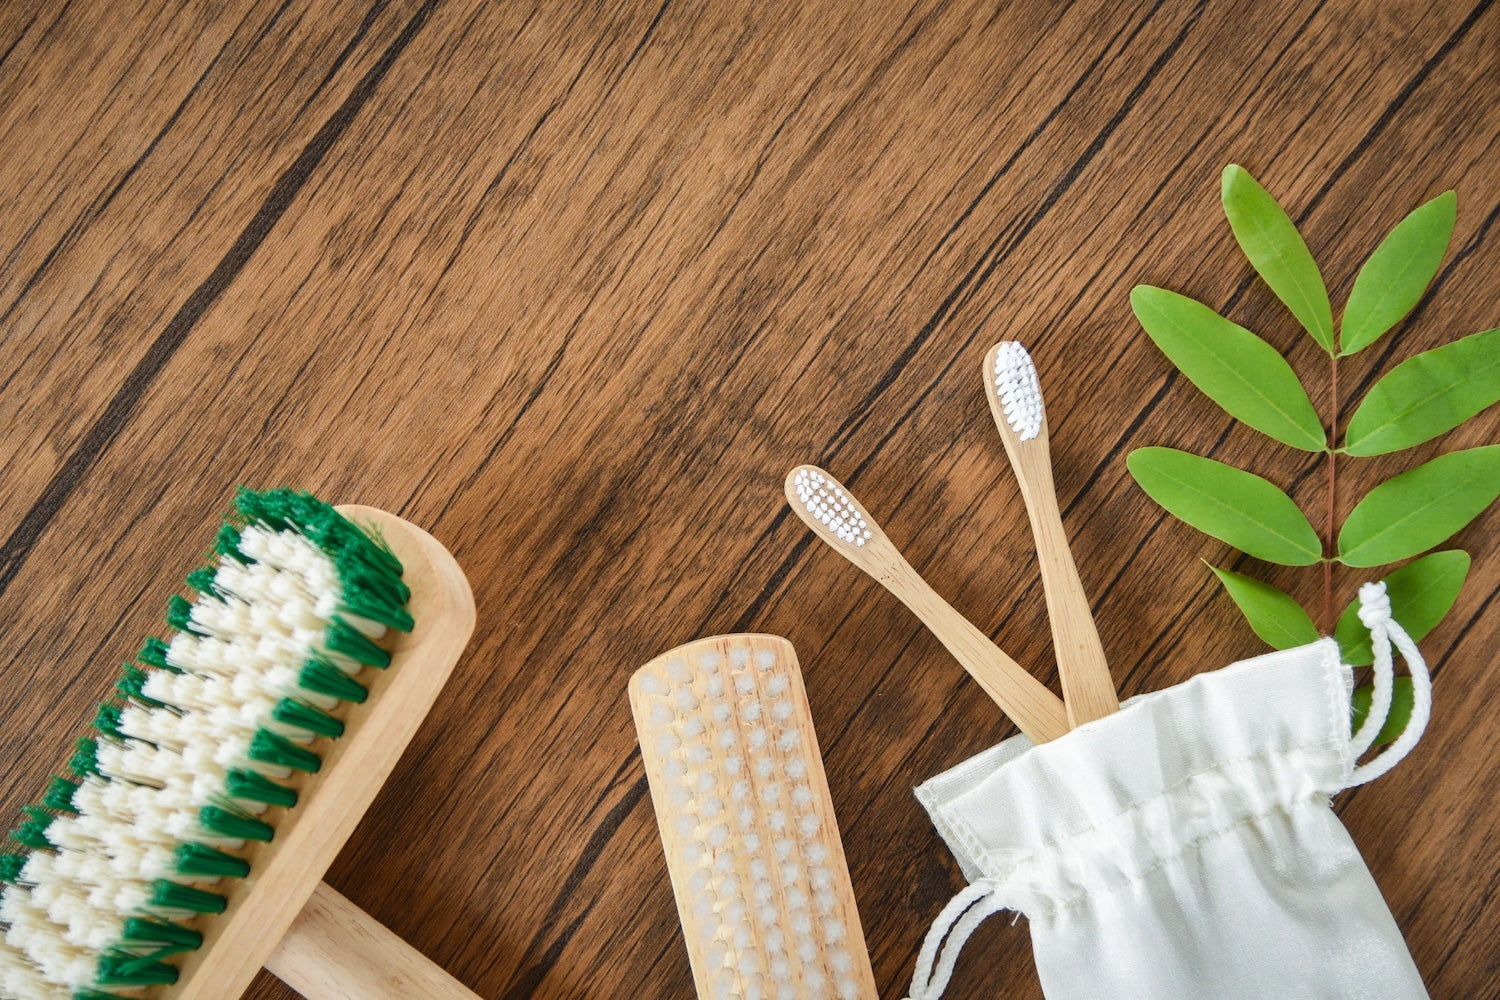 Eco friendly cleaning products (a broom, brush and toothbrushes) sit on a floor